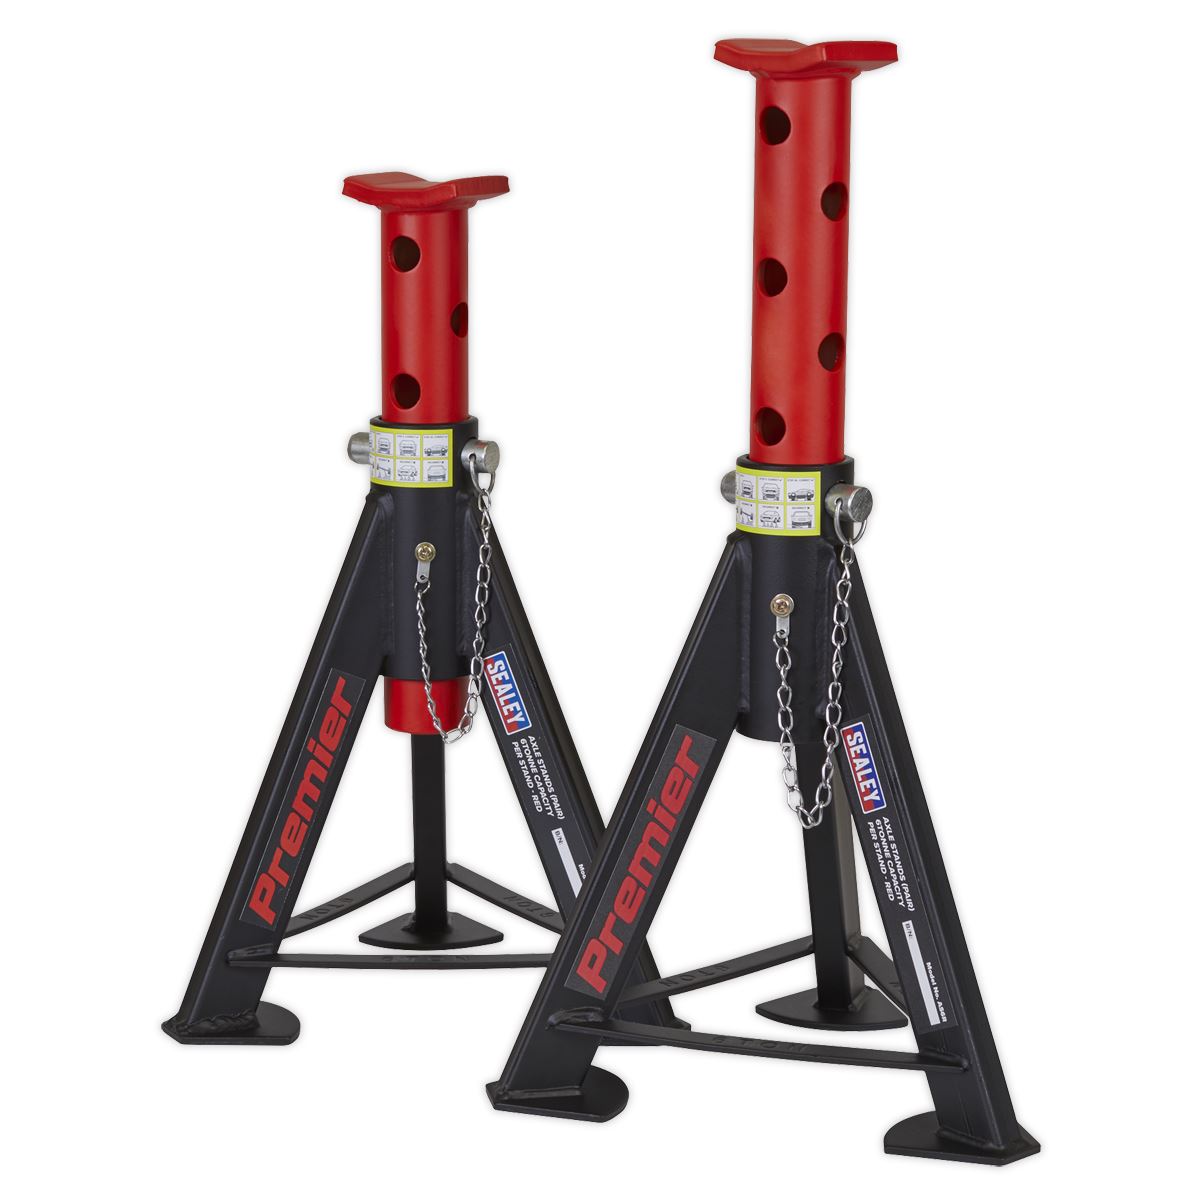 Sealey Premier Premier Axle Stands (Pair) 6 Tonne Capacity per Stand - Red